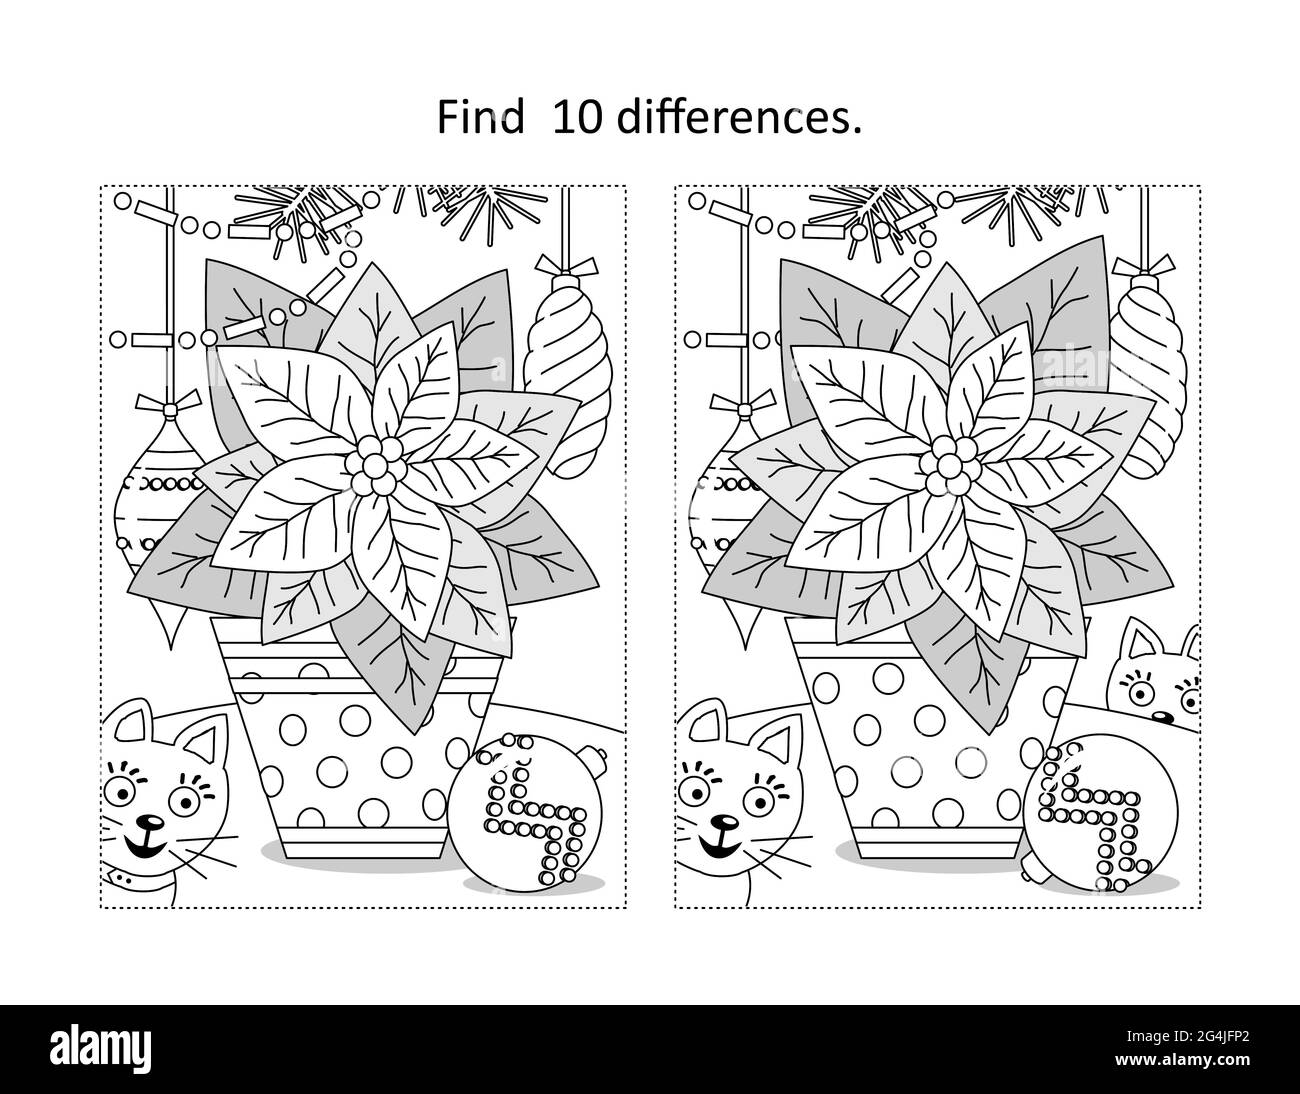 Find 10 differences visual puzzle and coloring page with poinsettia flower in the dotted pot Stock Photo